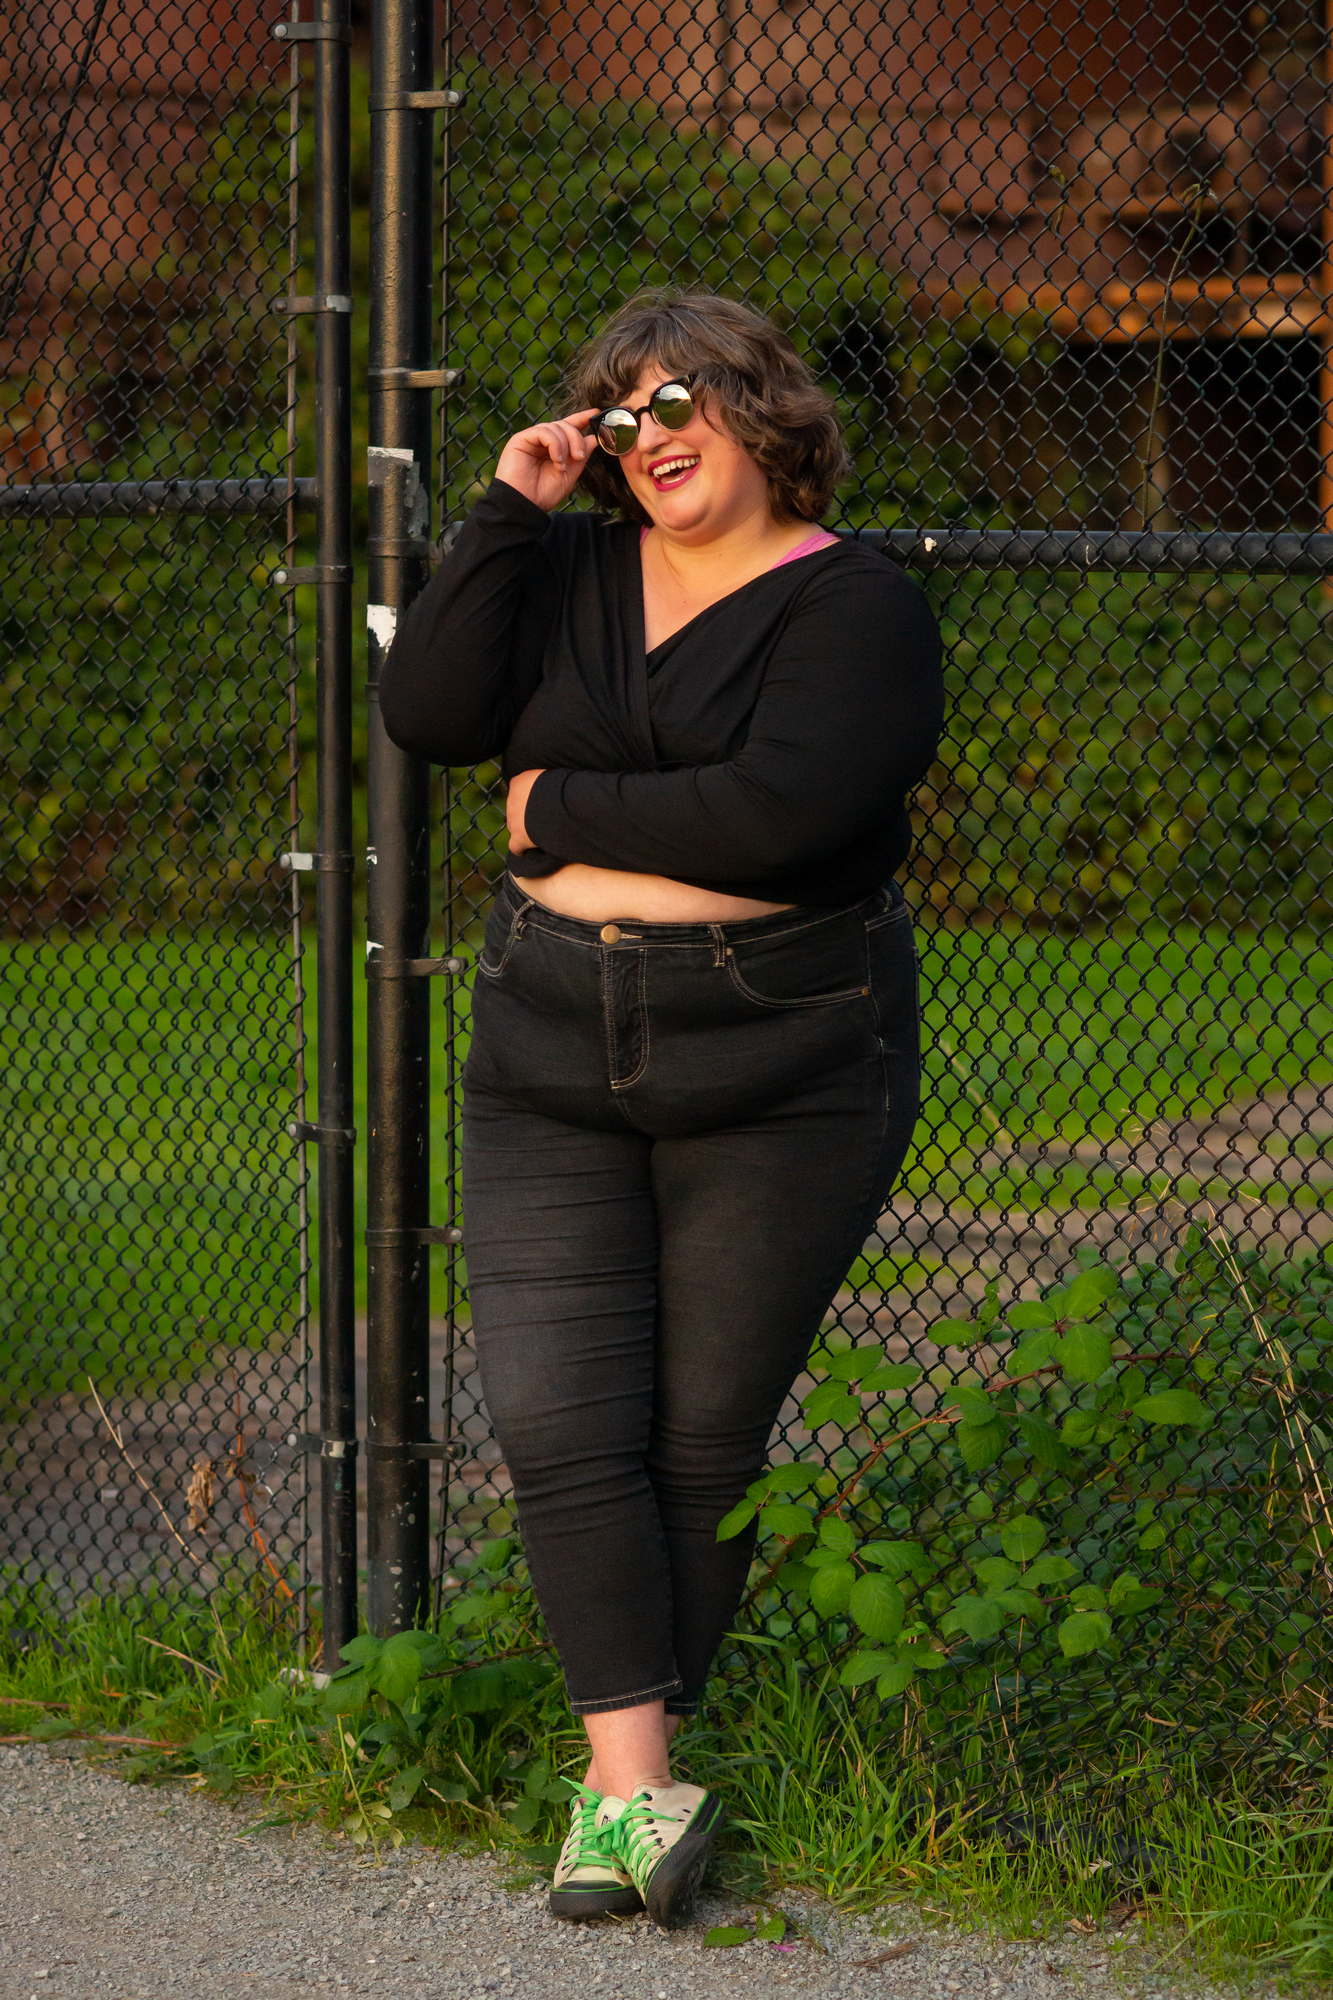 A fat woman wearing sunglasses leans against a fence during a portrait photoshoot outdoors